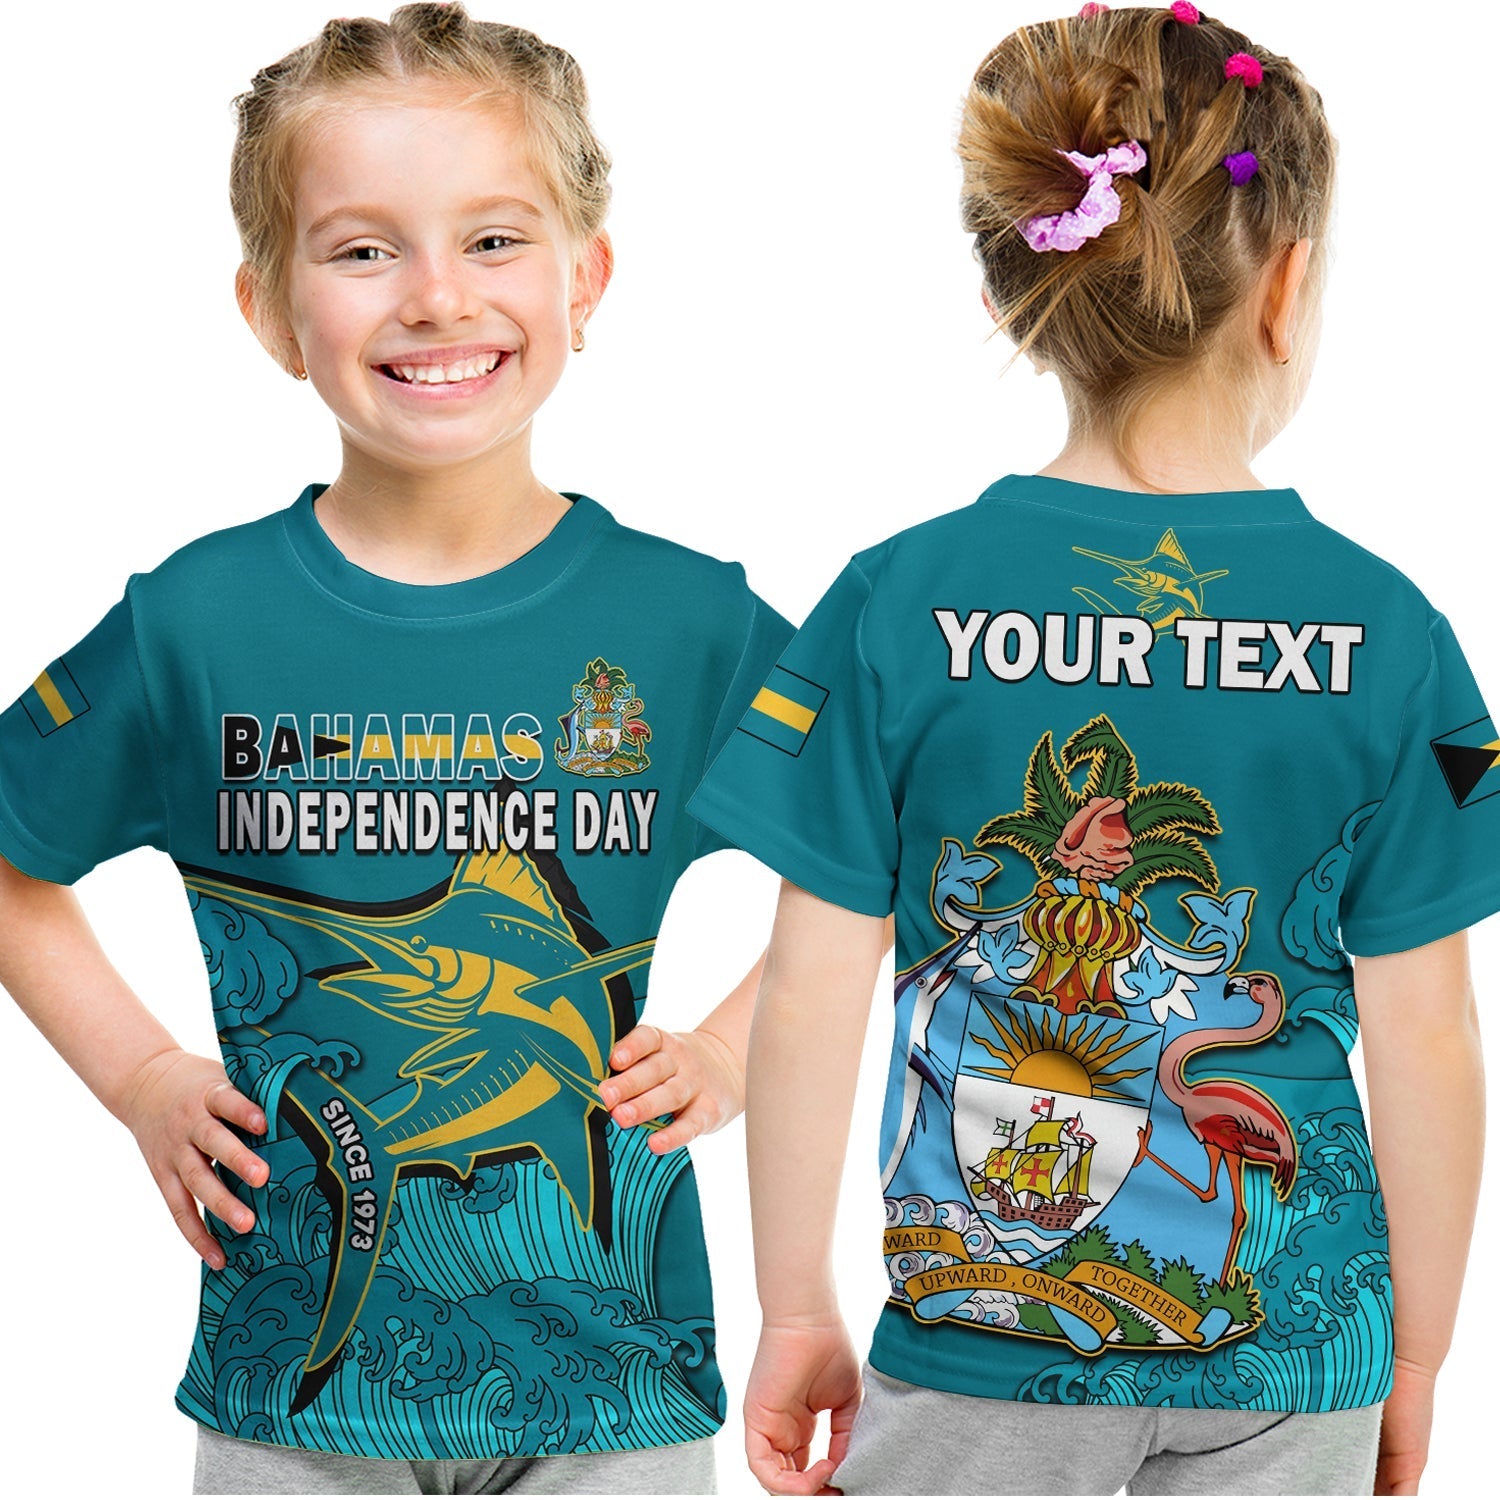 custom-personalised-bahamas-independence-day-t-shirt-kid-blue-marlin-since-1973-style